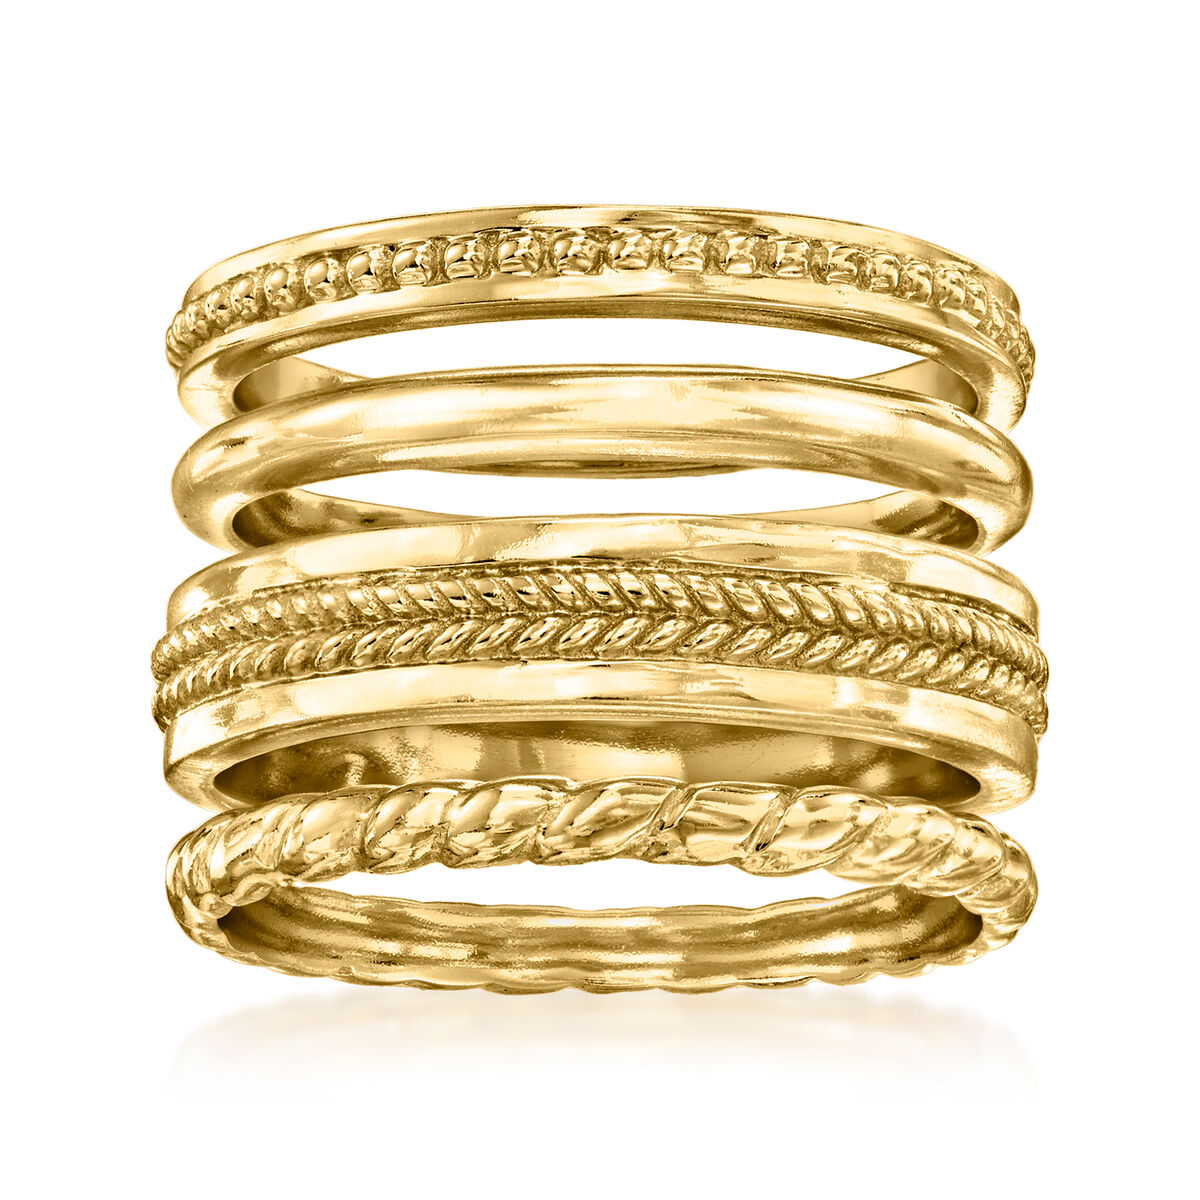 18kt Gold Over Sterling Jewelry Set: Four Stackable Rings | Ross-Simons